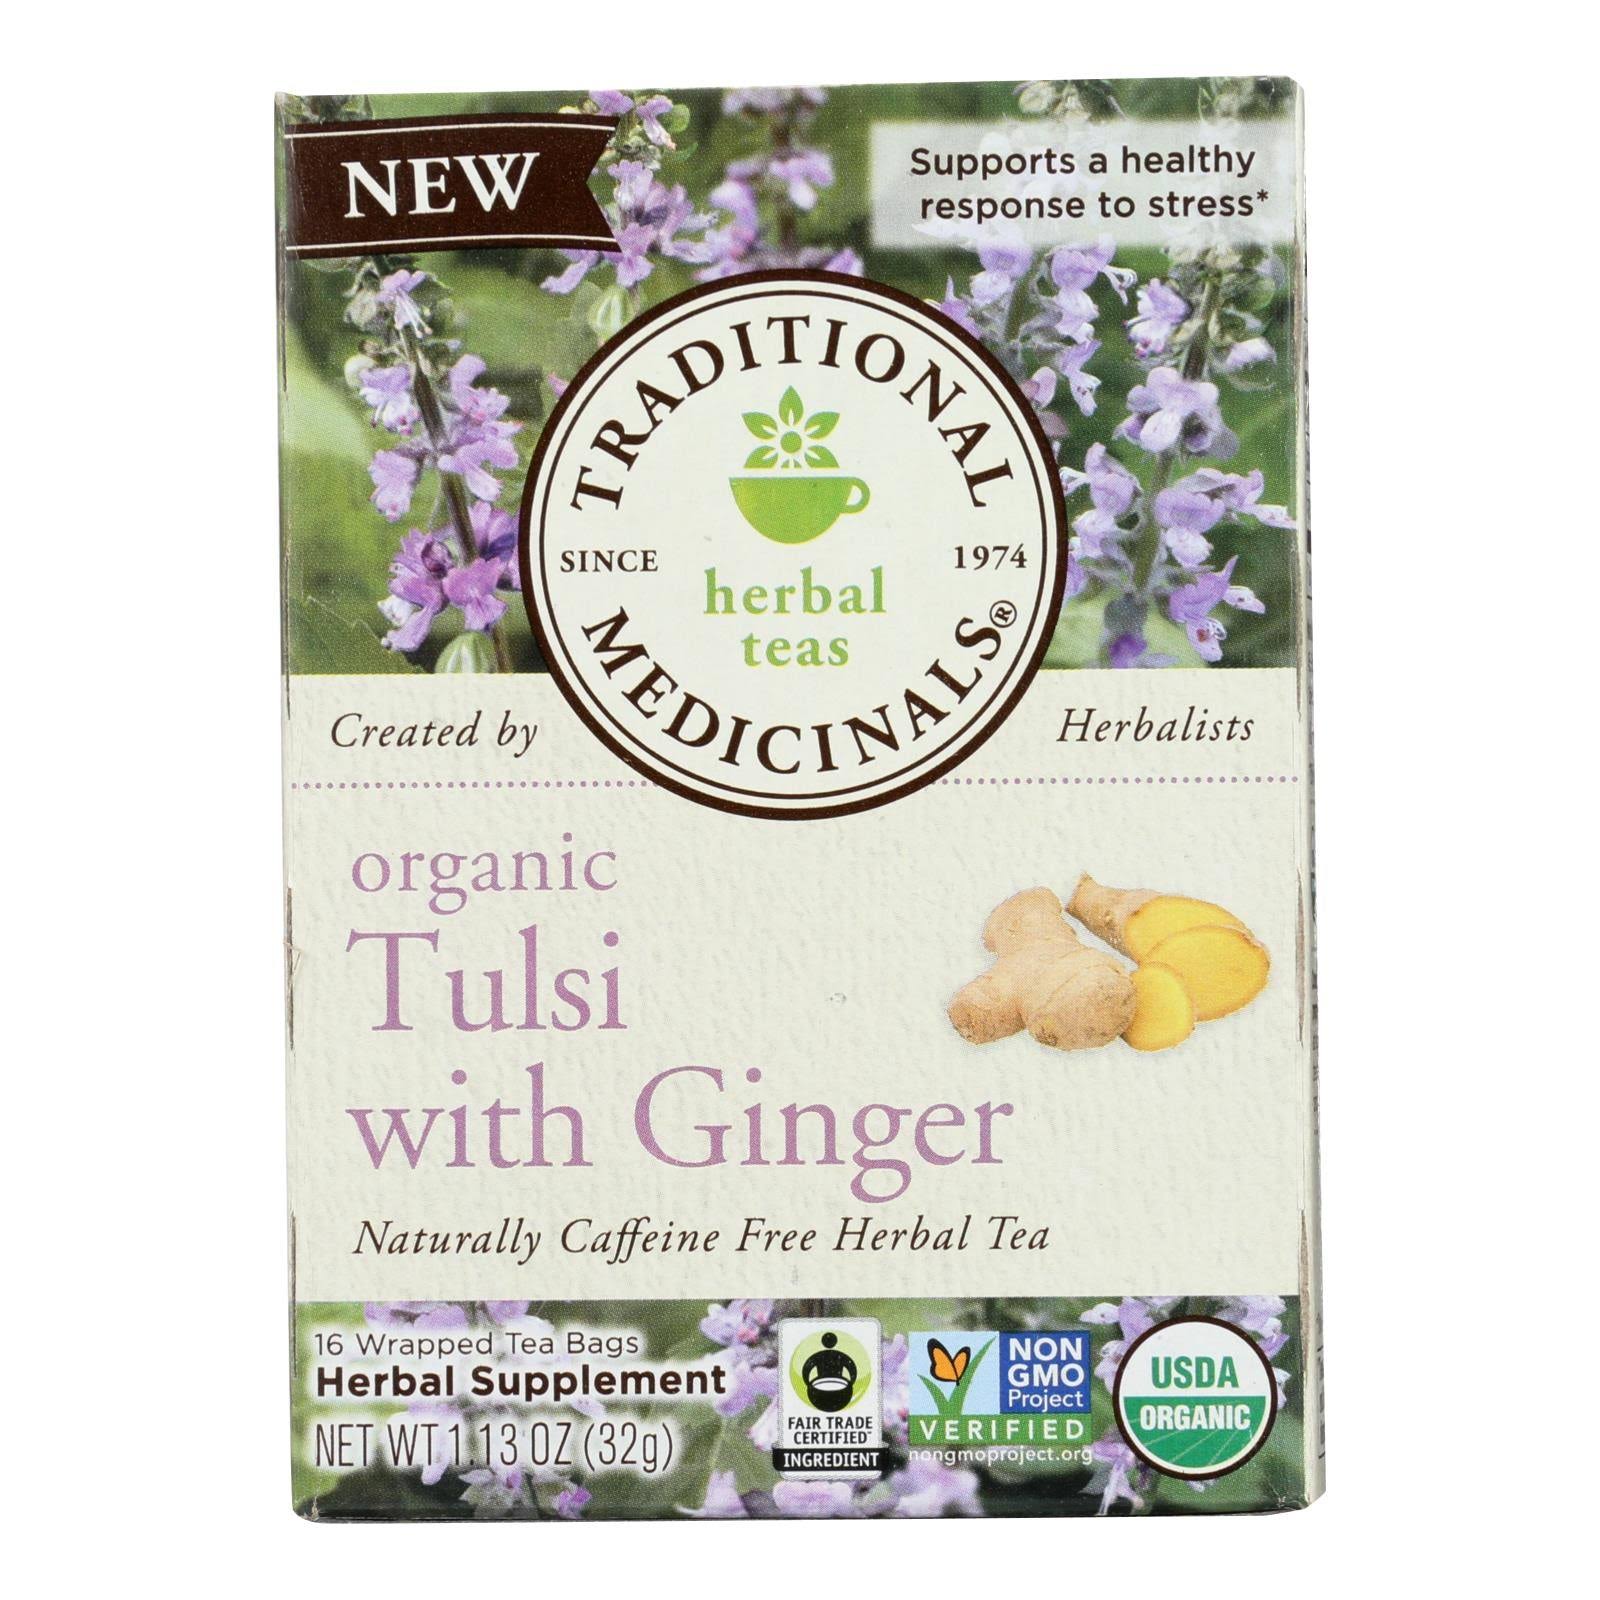 Traditional Medicinals Organic Tulsi with Ginger Tea - 16 Bags